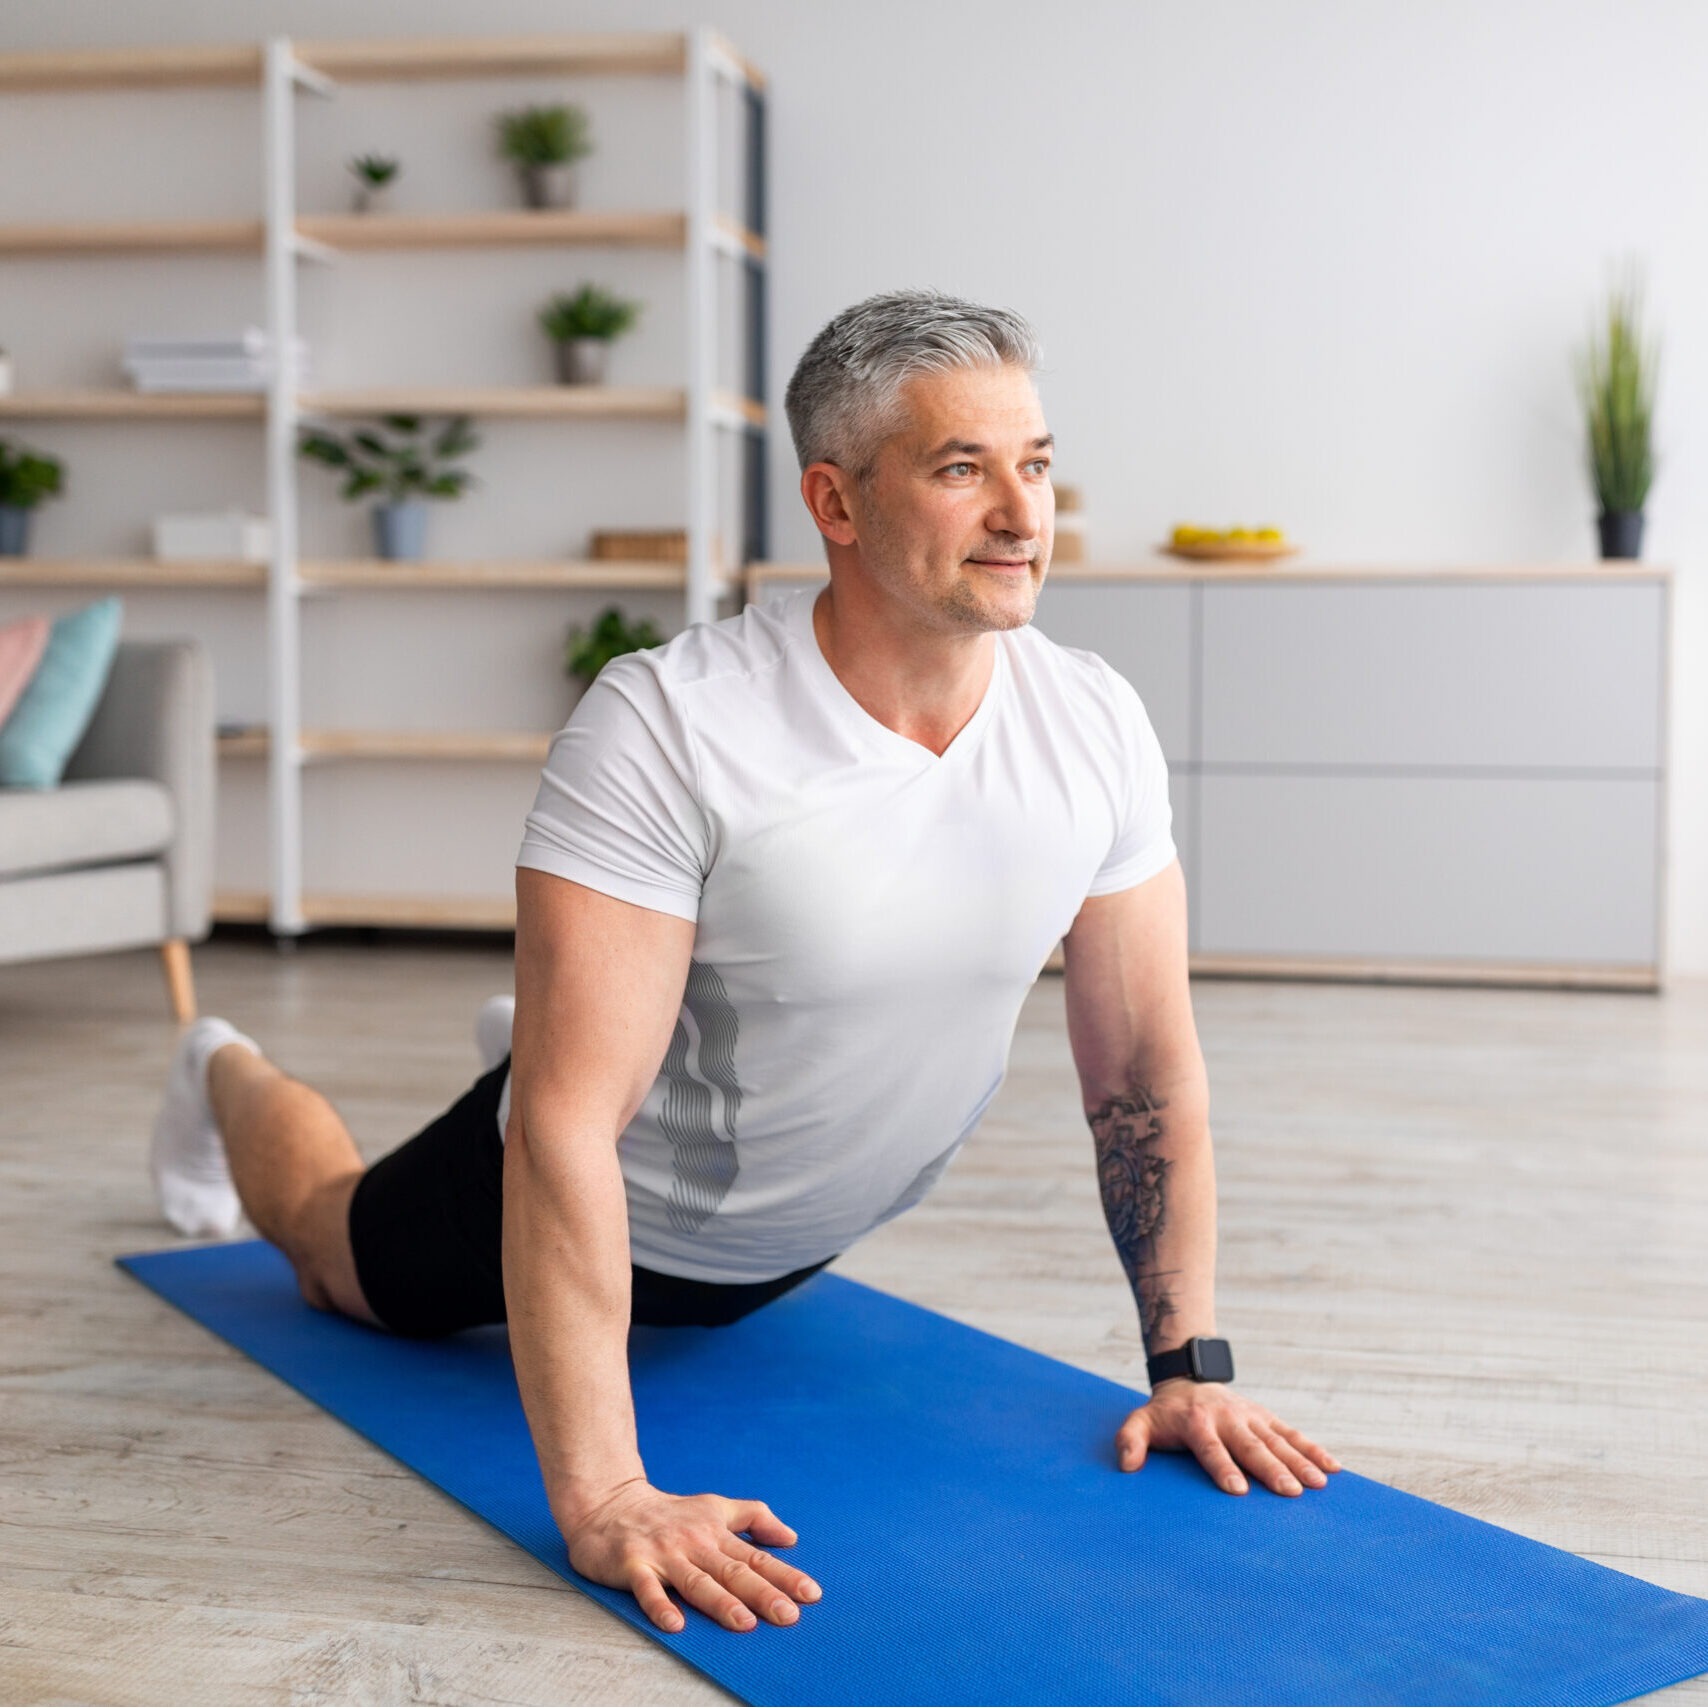 Mature man doing cobra pose, stretching back muscles, exercising in living room